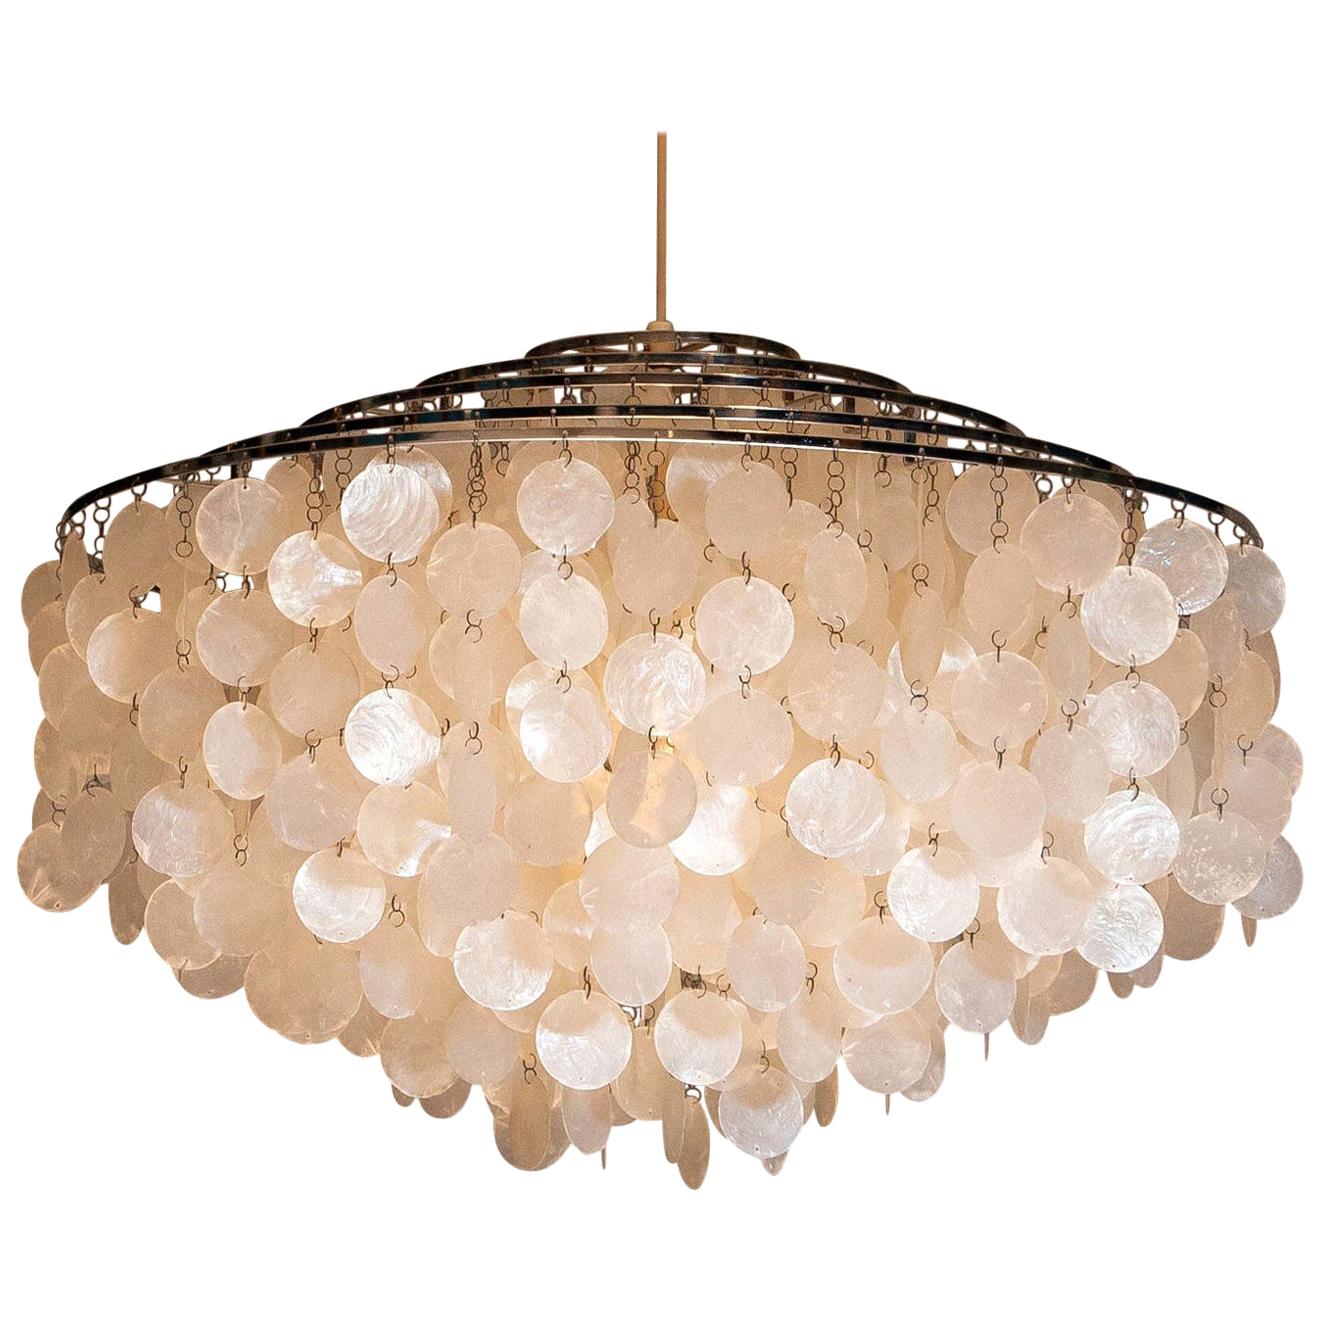 1960s, Extra Large Capiz Shell Chandelier by Verner Panton for Luber Ag, Swiss